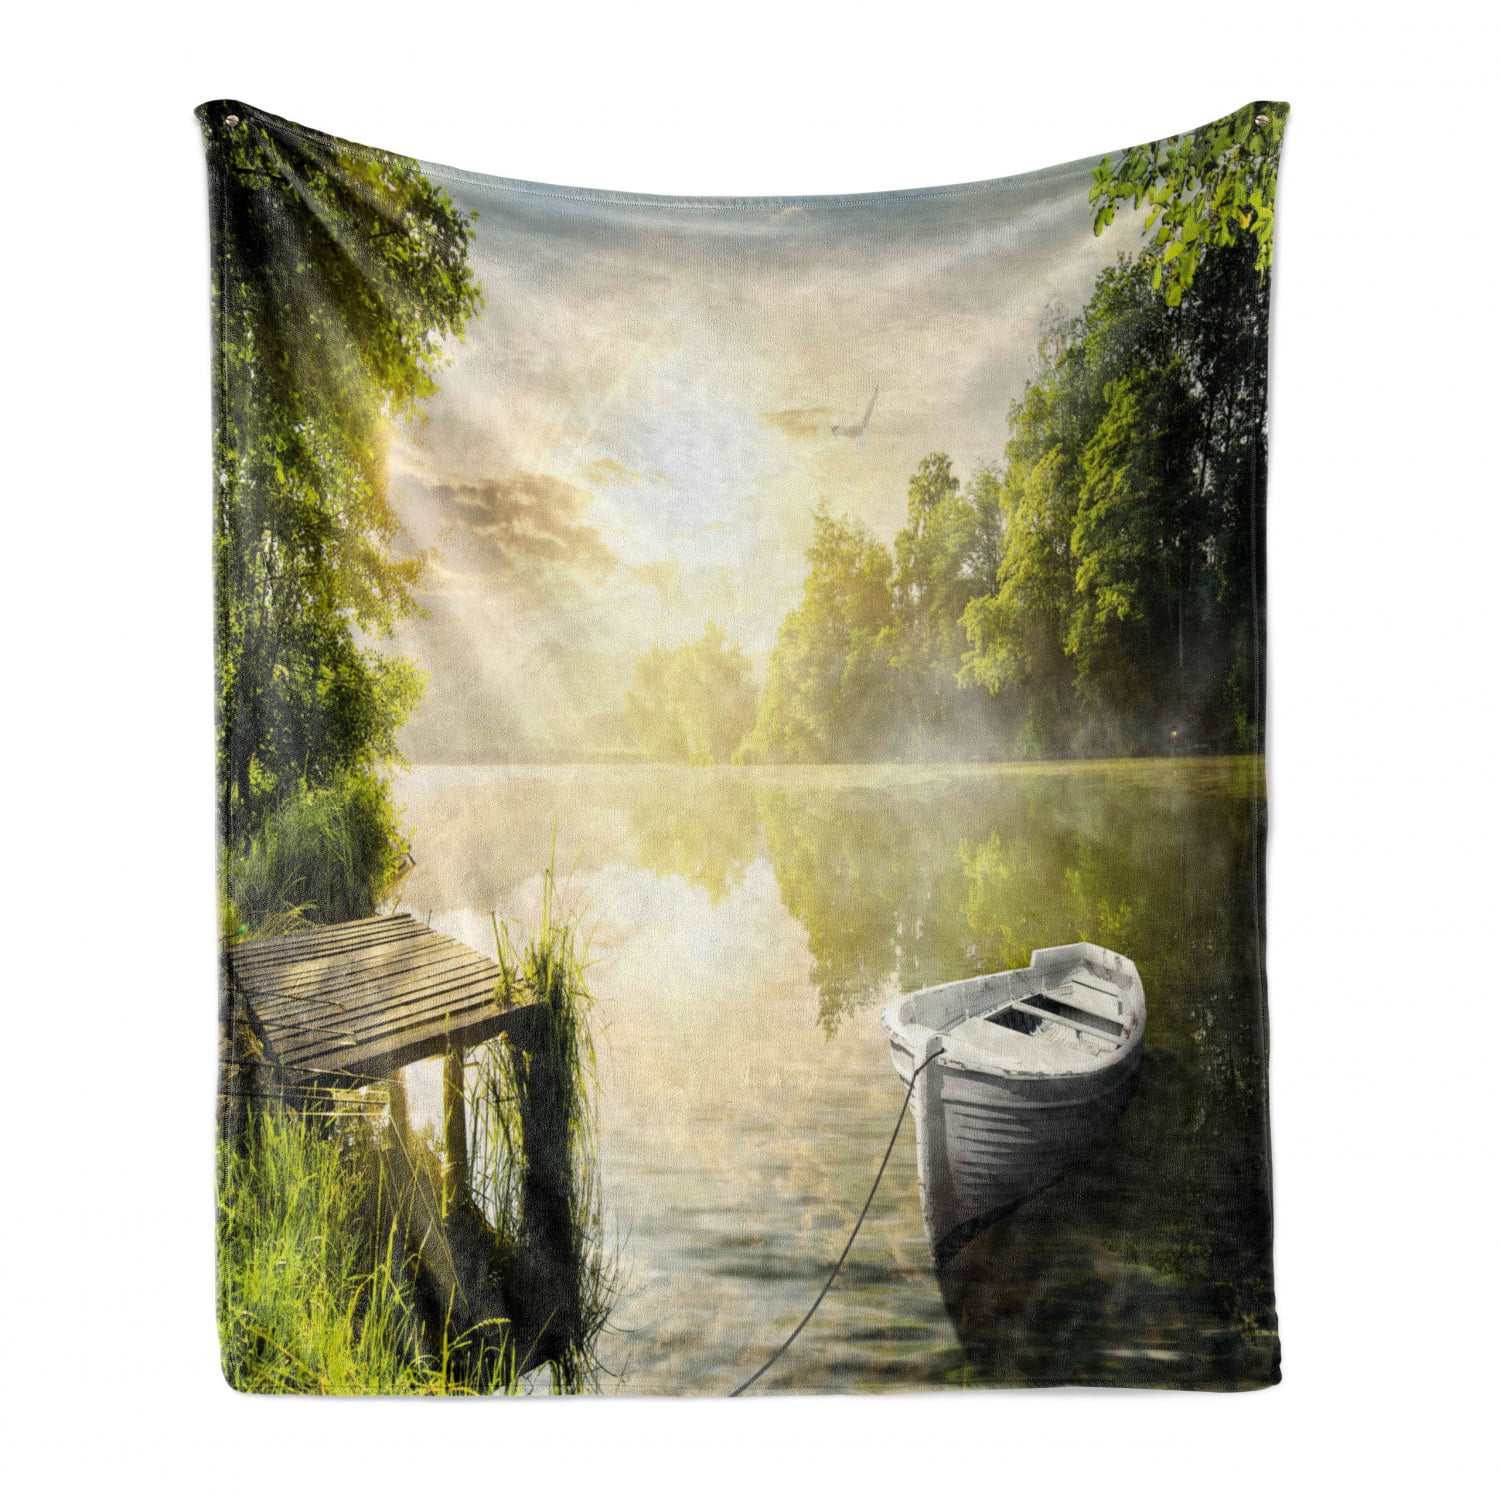 Boat by The Foggy Lake Deck Dreamy Forest in The Morning Country Style Image Ambesonne Nature Throw Blanket Flannel Fleece Accent Piece Soft Couch Cover for Adults 50 x 60 Olive Green White 